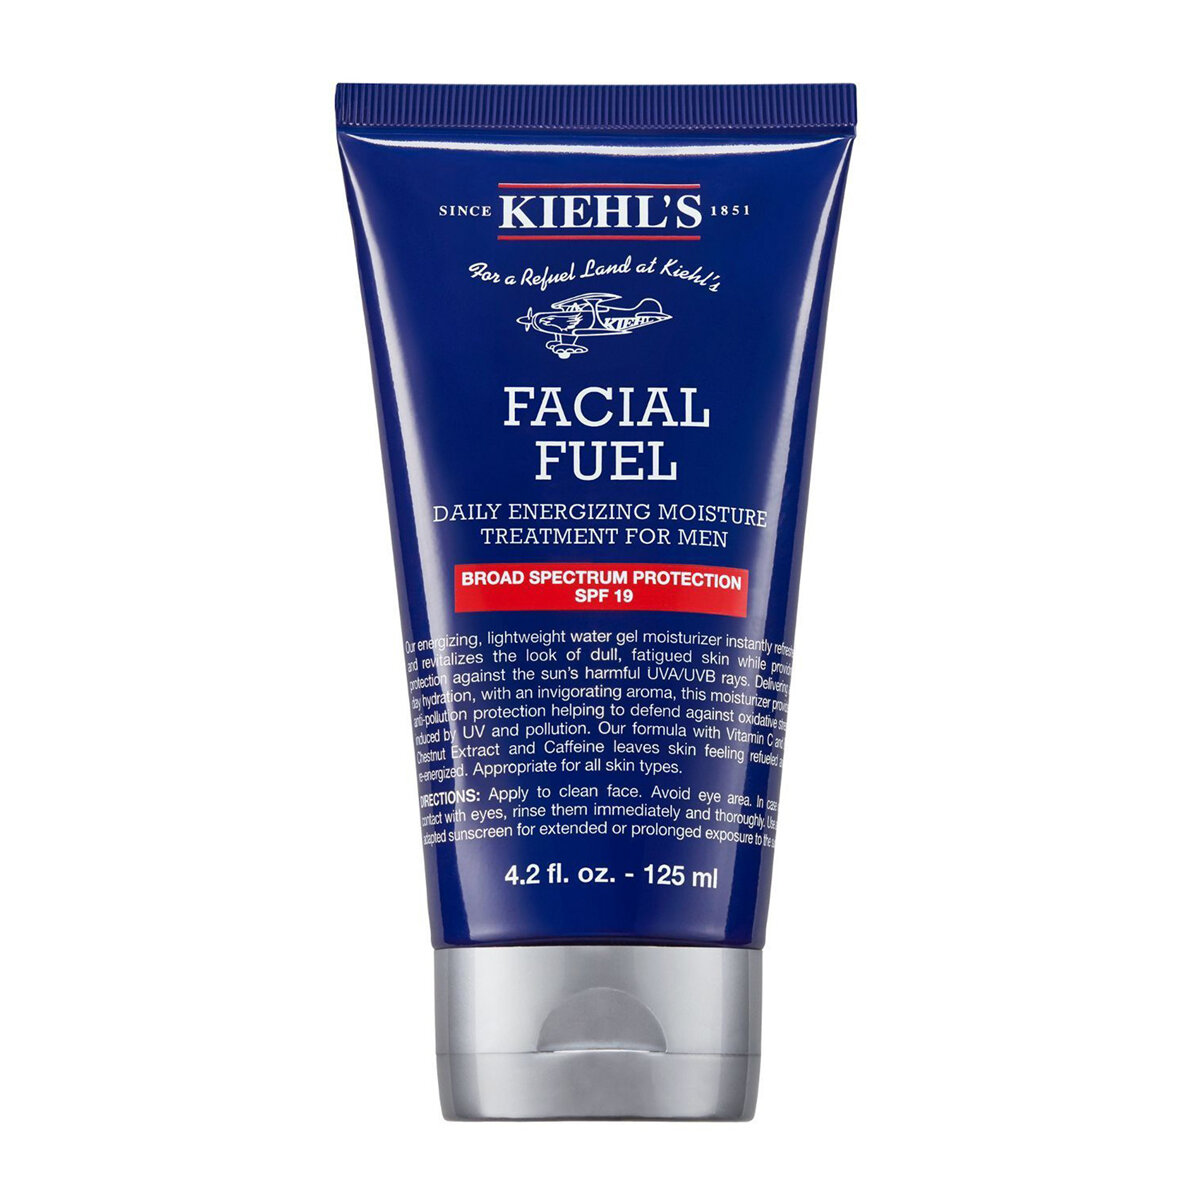 Kiehl's Facial Fuel Daily Energizing Moisture Treatment for Men SPF19 125ml, £42